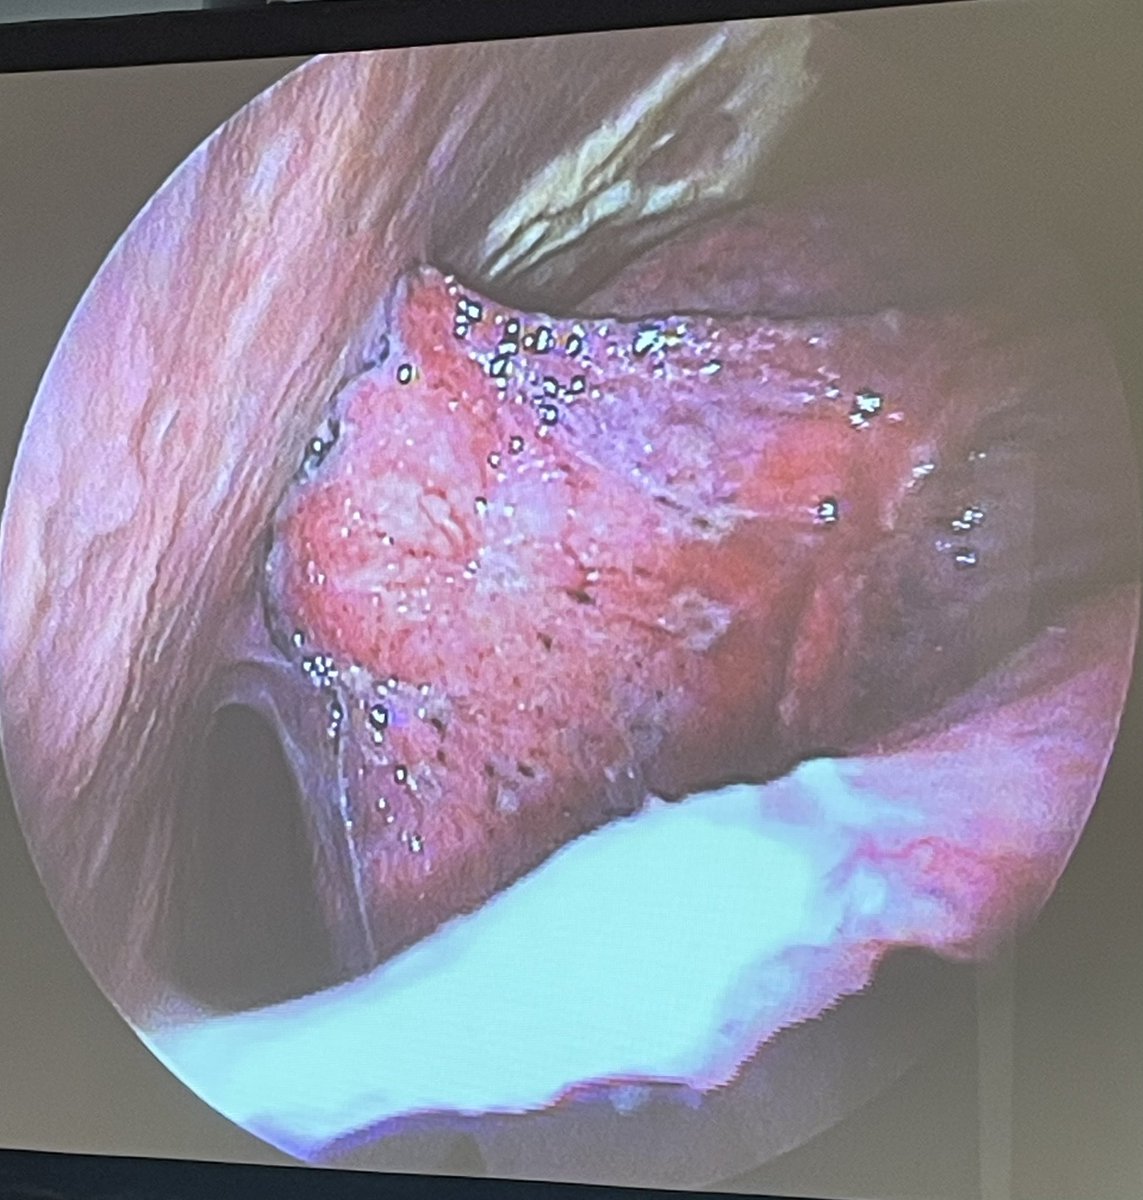 2 days of learning to perform medical thoracoscopy for the diagnosis and treatment of unexplained pleural effusions 🫁. This amazing procedure has few complications, and has a high utility in clinical diagnosis and treatment with a diagnostic yield of >95% 🤩